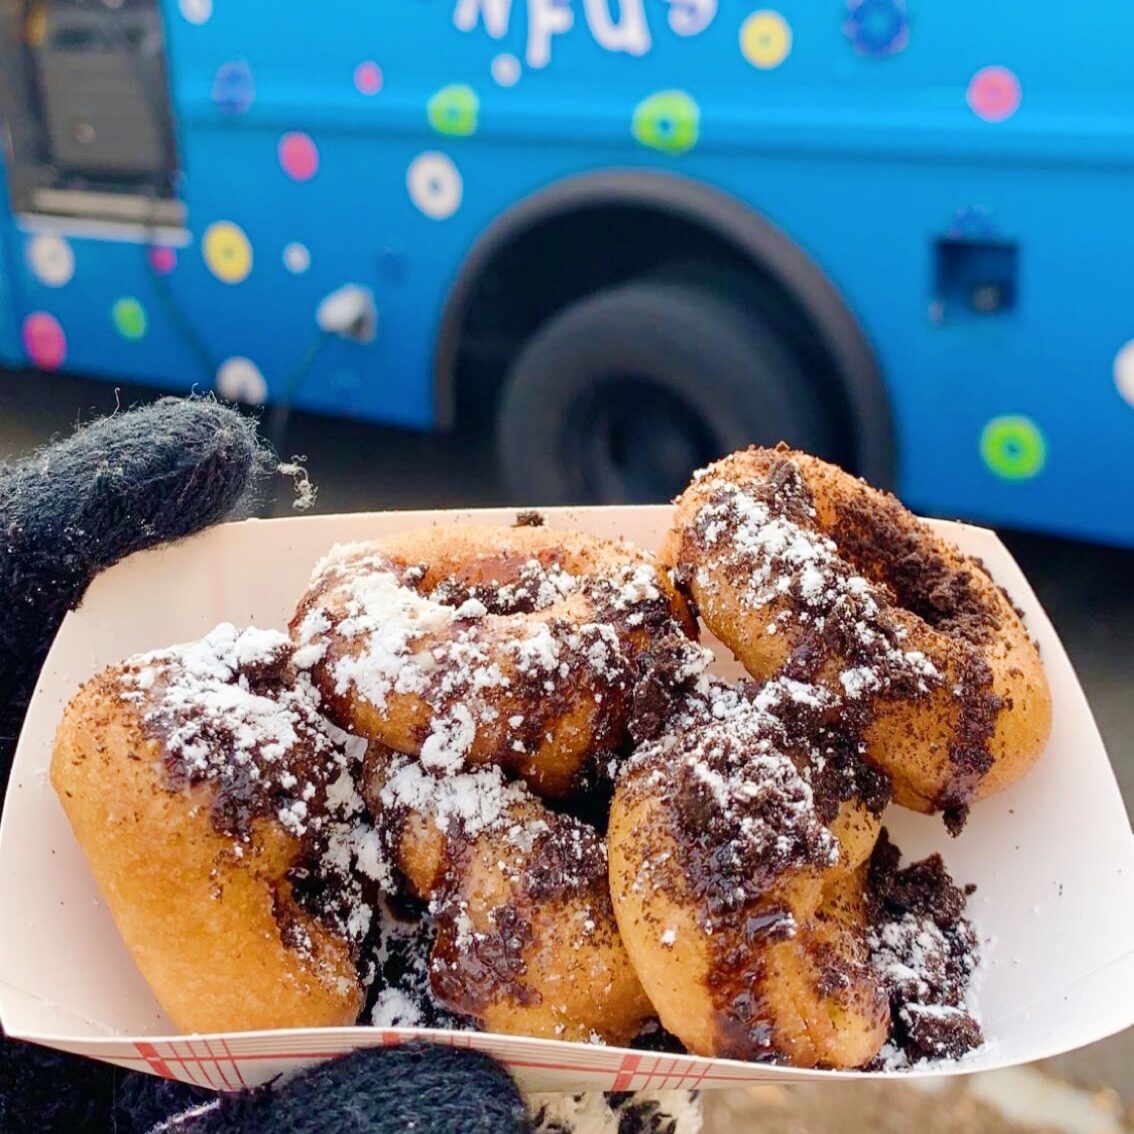 Photo of hand holding a takeout container with mini donuts covered in chocolate and powdered sugar. A blue food truck is in the background.